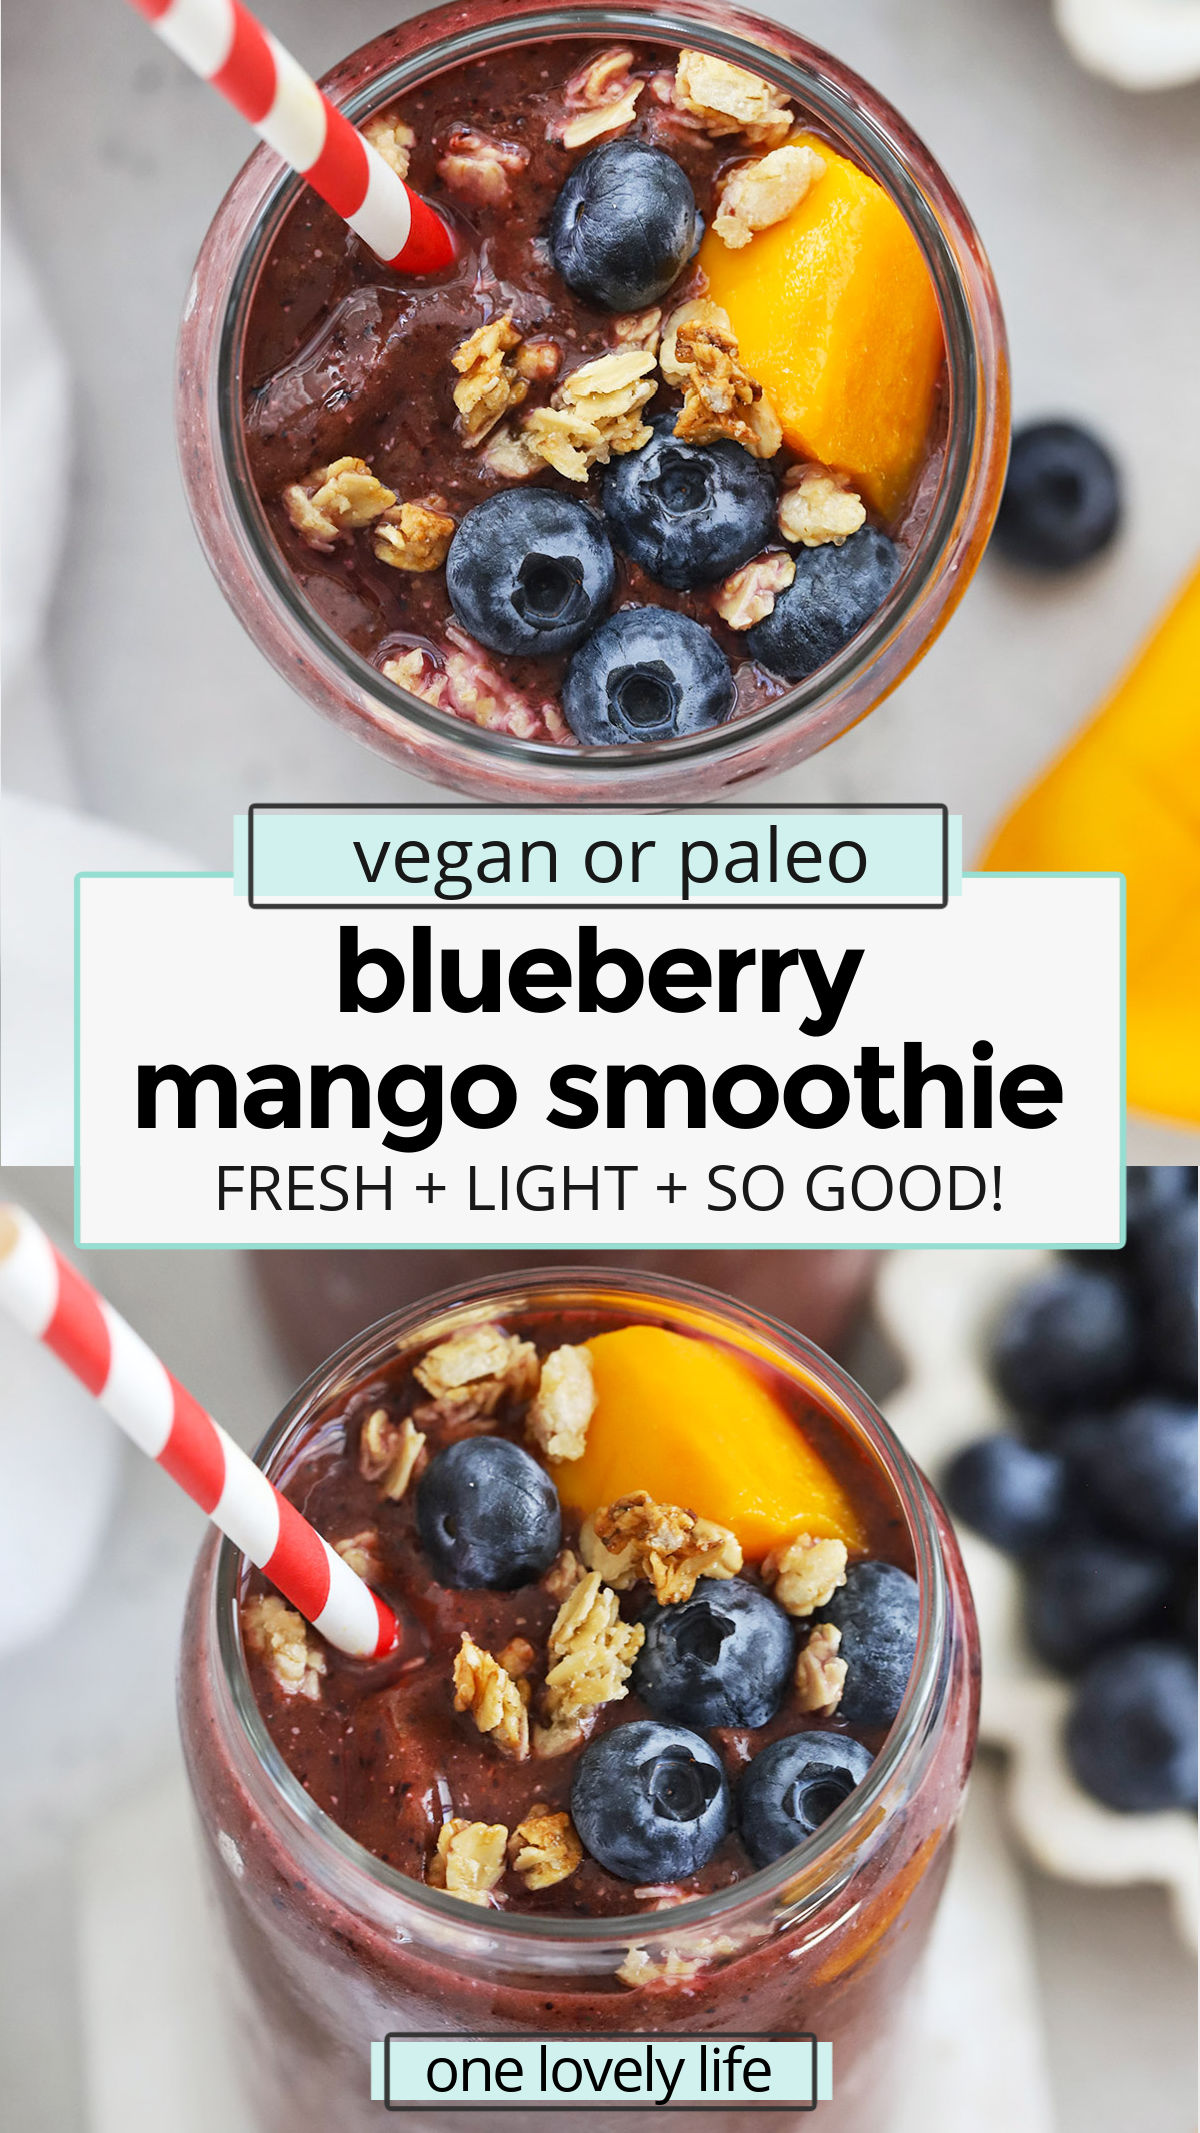 Blueberry Mango Smoothie - This yummy mango berry smoothie recipe is refreshing, light & delicious. The whole family loves it! Vegan or Paleo // Blueberry Smoothies / Mango smoothies // mango berry smoothie recipe // berry mango smoothie // mango blueberry smoothies / kid friendly smoothie / purple smoothie / fruit smoothie / breakfast smoothie / paleo smoothie / vegan smoothie / green smoothie